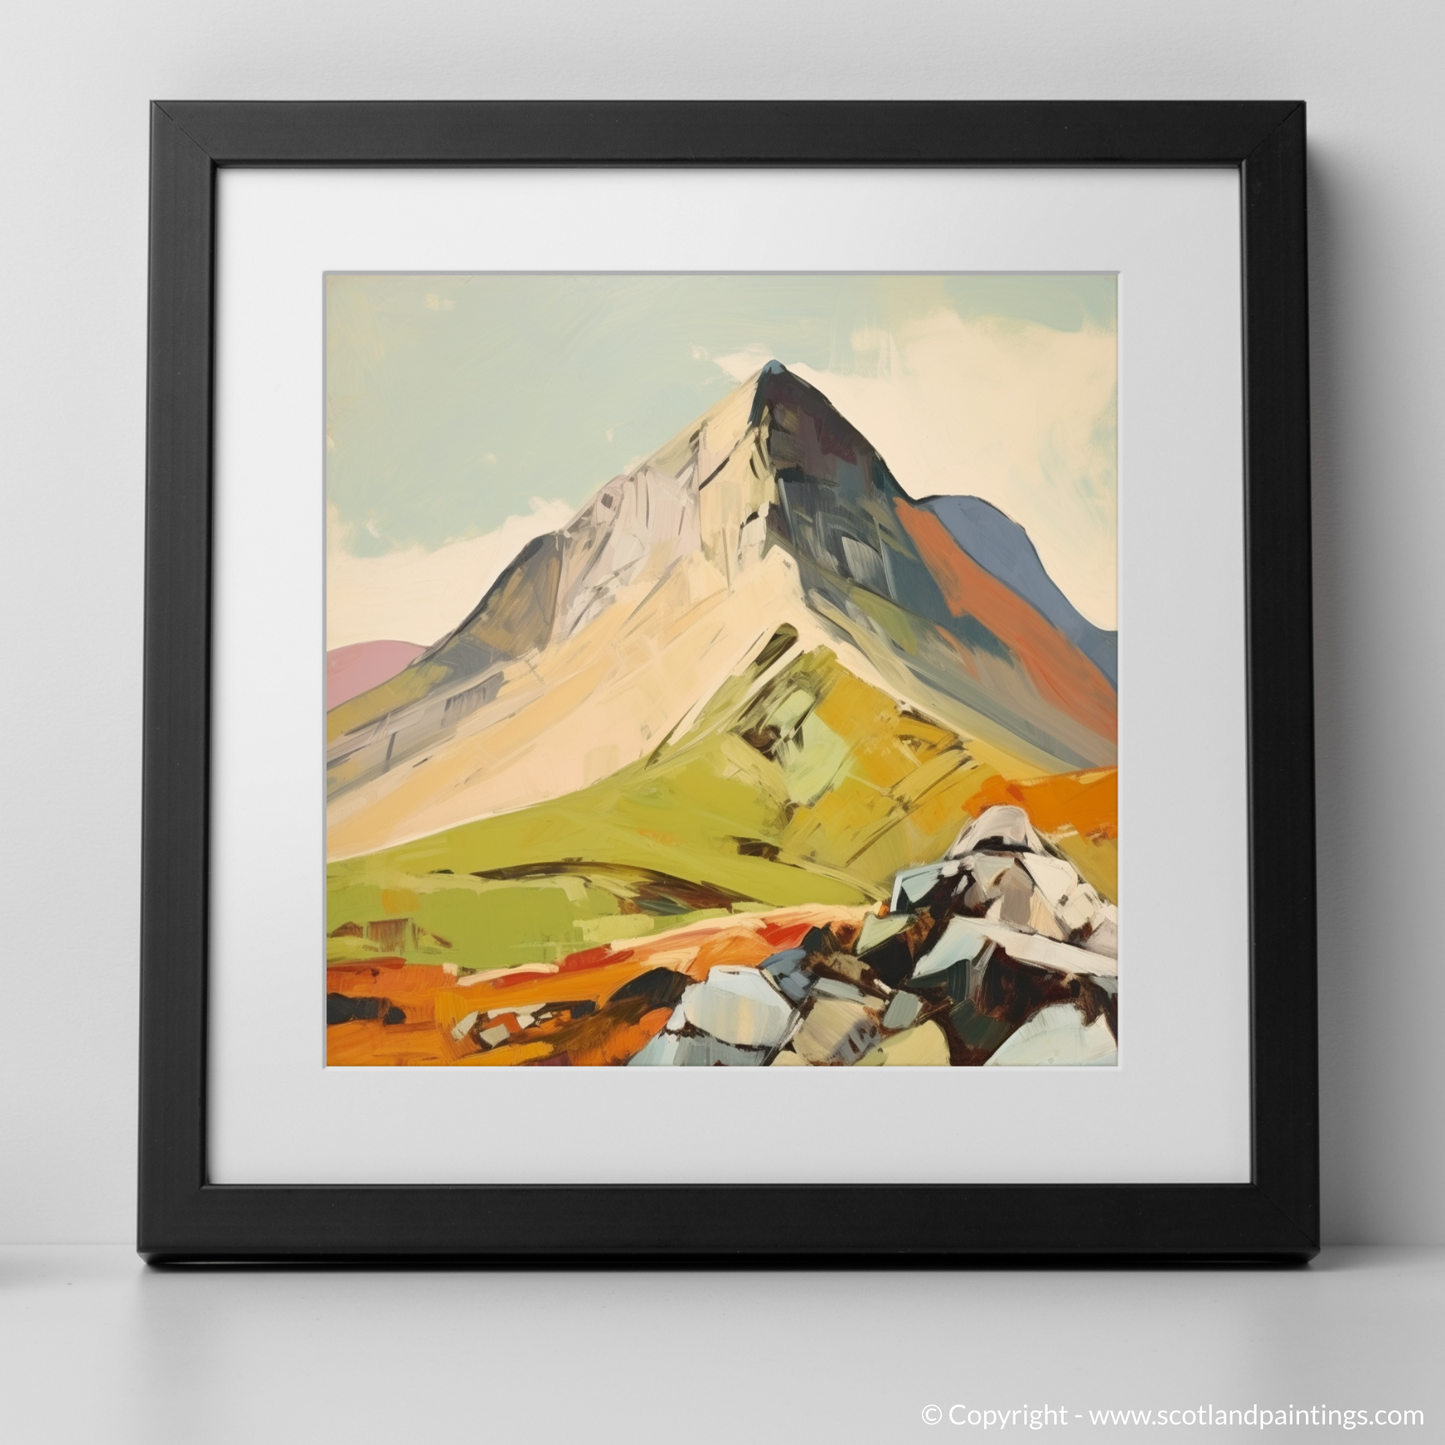 Art Print of A mountain in Scotland with a black frame